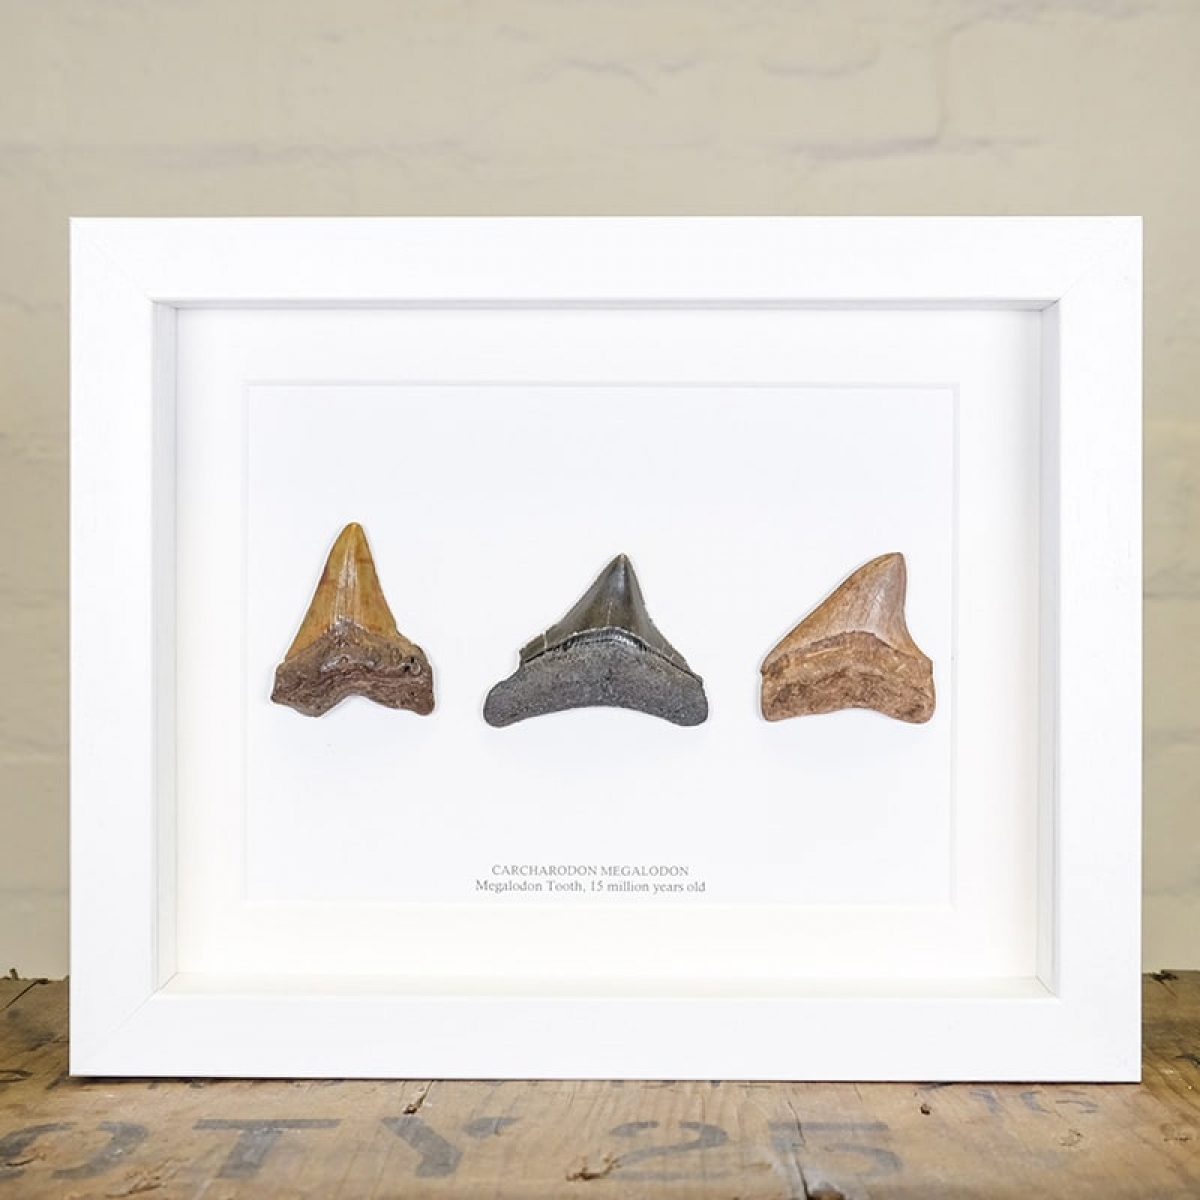 A Trio of Small Megalodon Shark Teeth (Carcharodon megalodon) Fossil in Box Frame